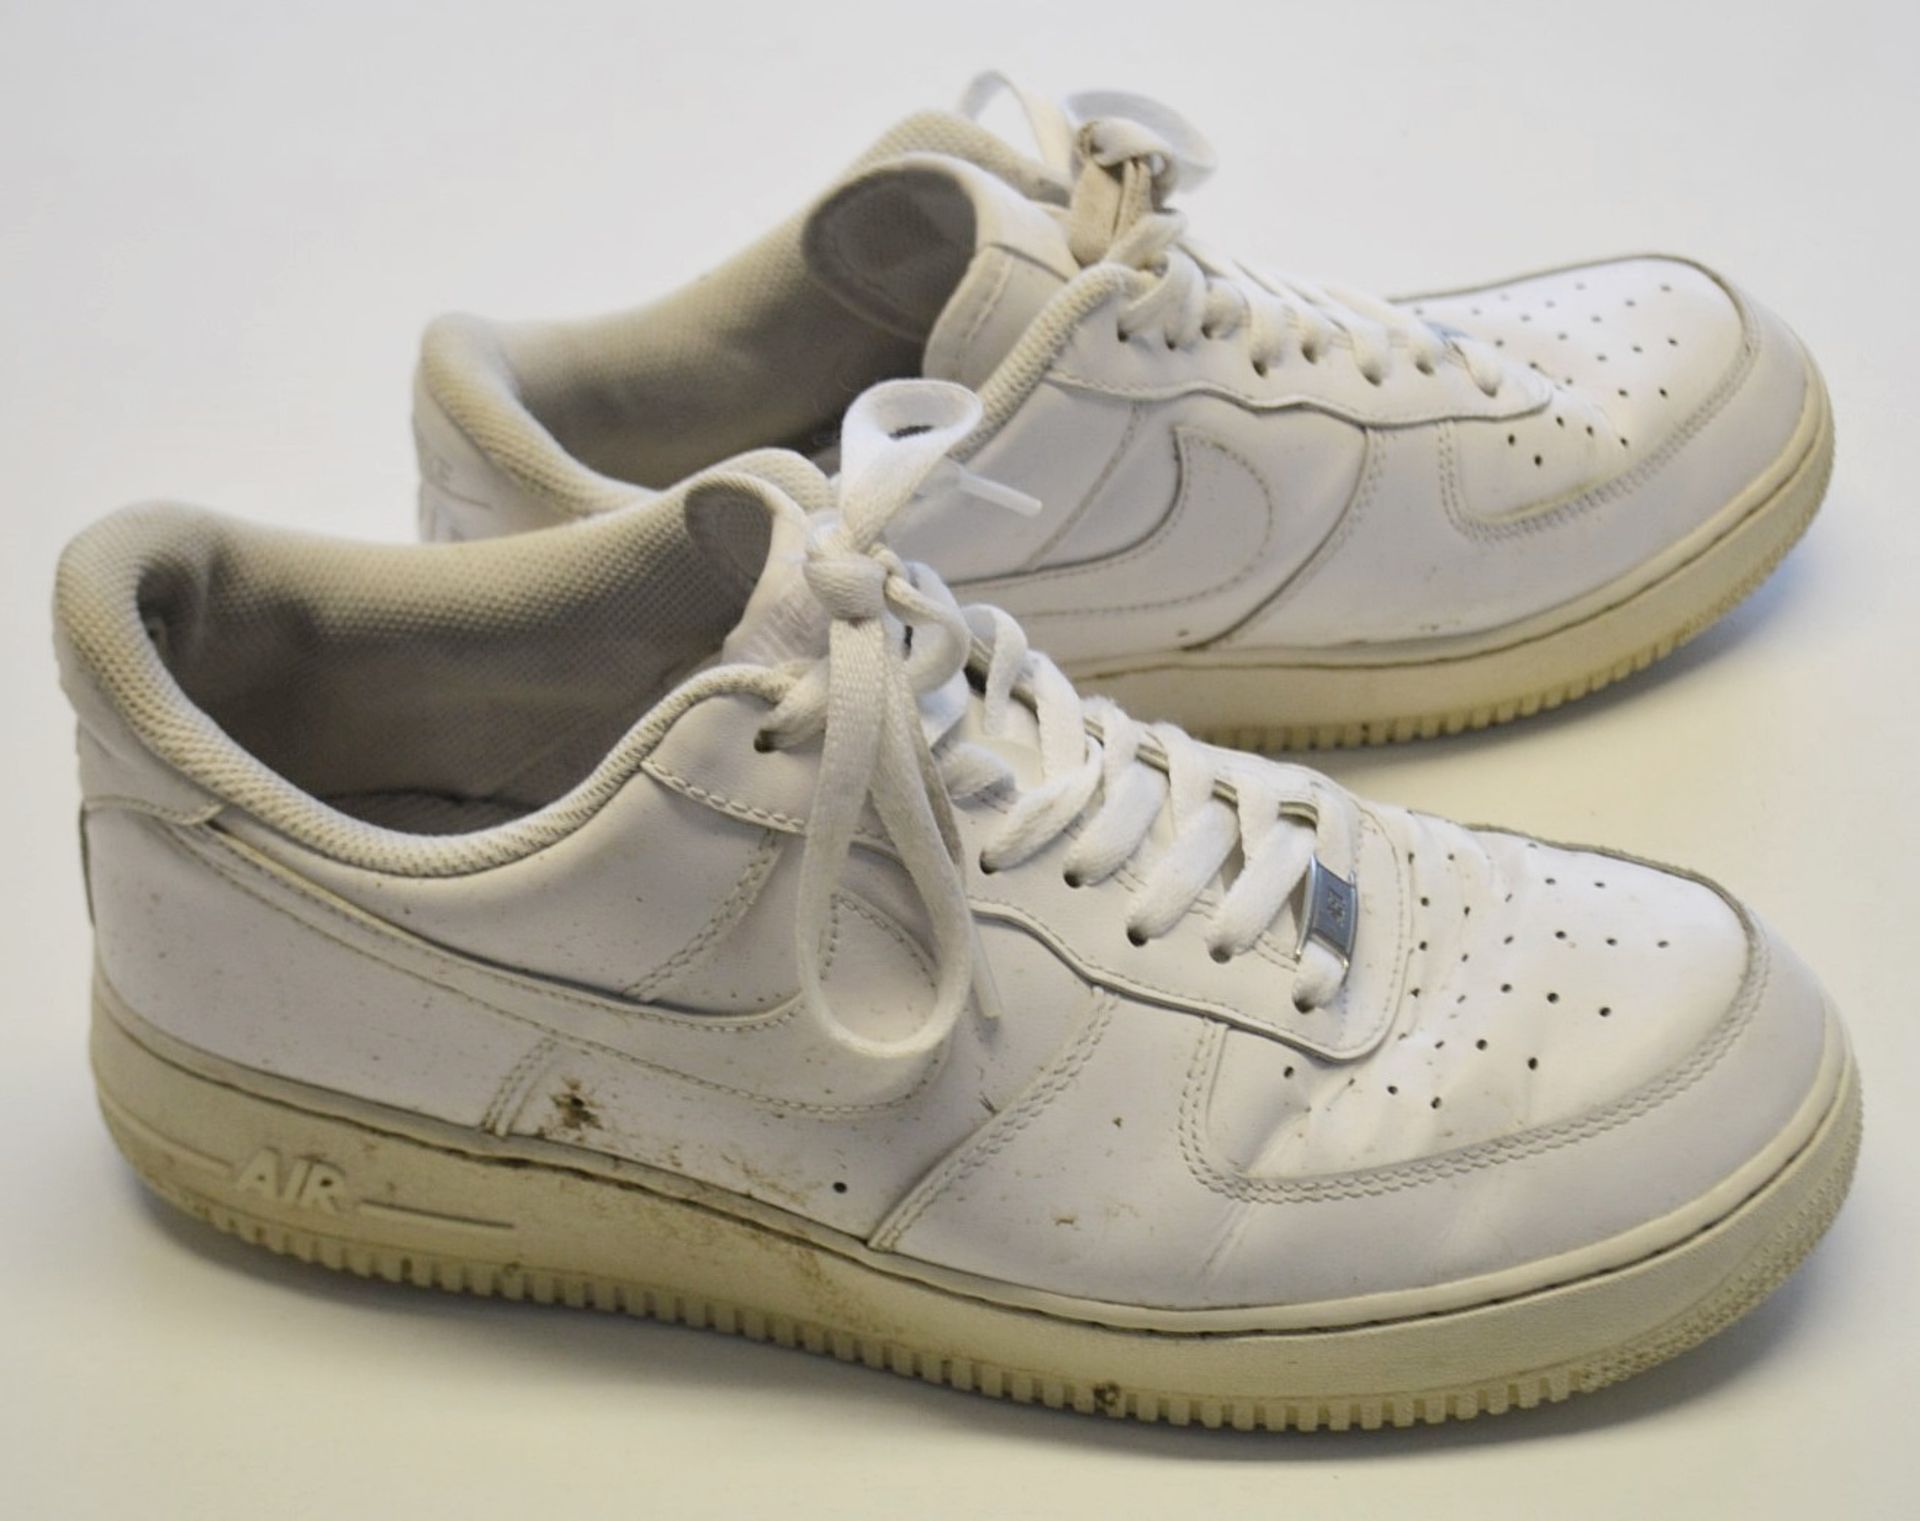 1 x Pair Of Men's Genuine Nike 'Air Force 1 Low' Trainers In White - Size (EU/UK): 44.5/9.5 - - Image 8 of 9